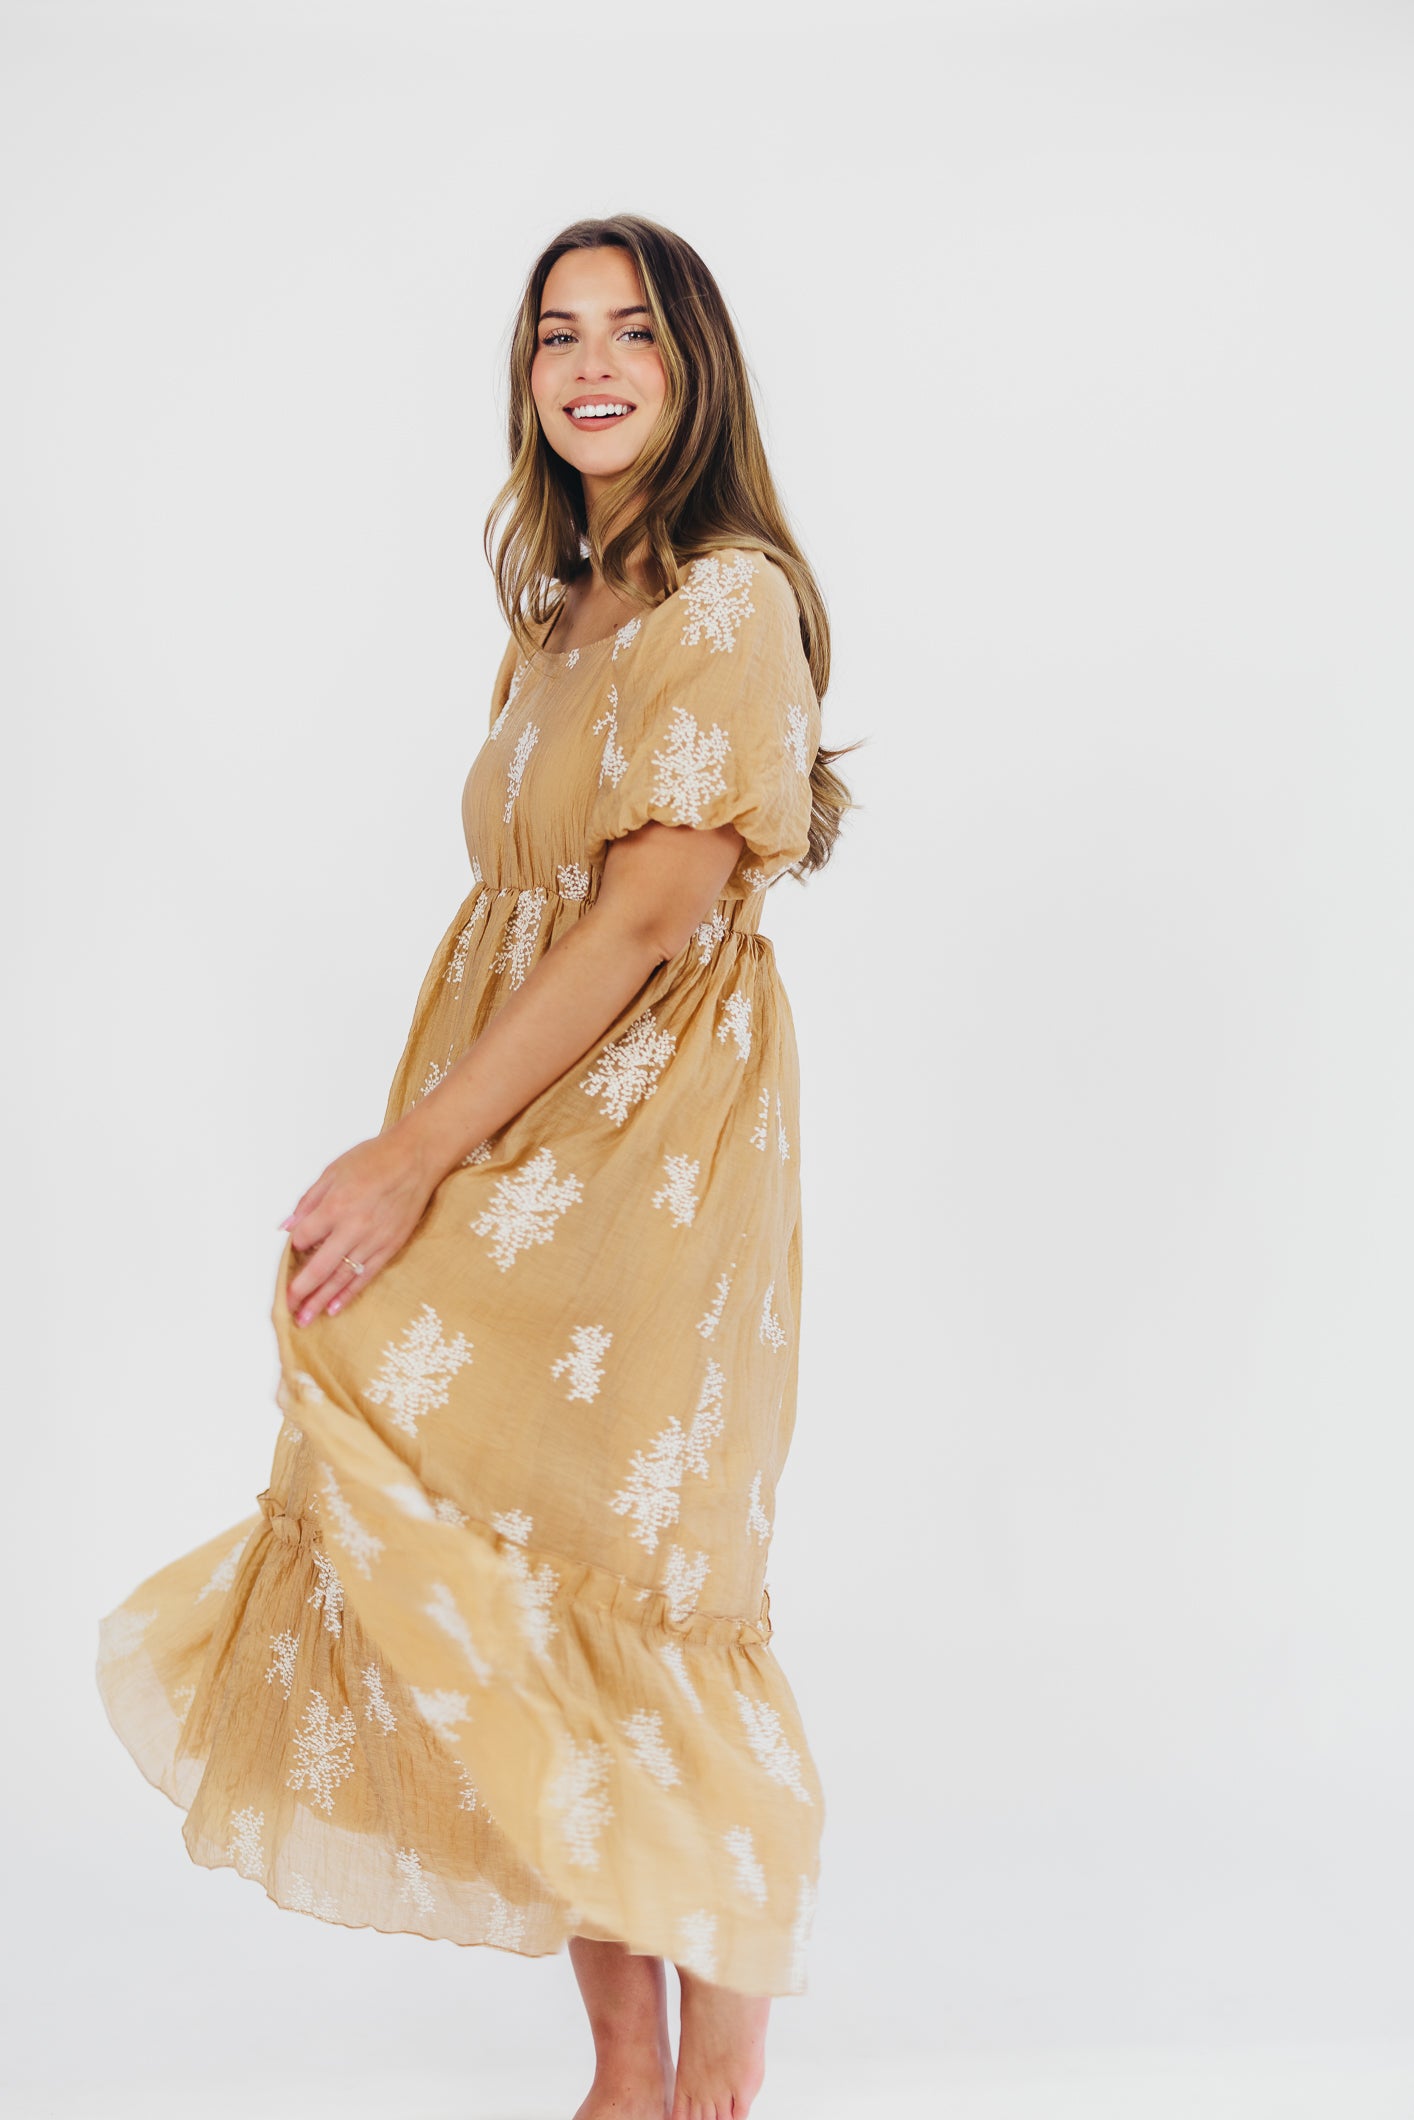 Hallie Embroidered Maxi Dress in Camel - Bump Friendly & Inclusive Sizing (S-3XL)